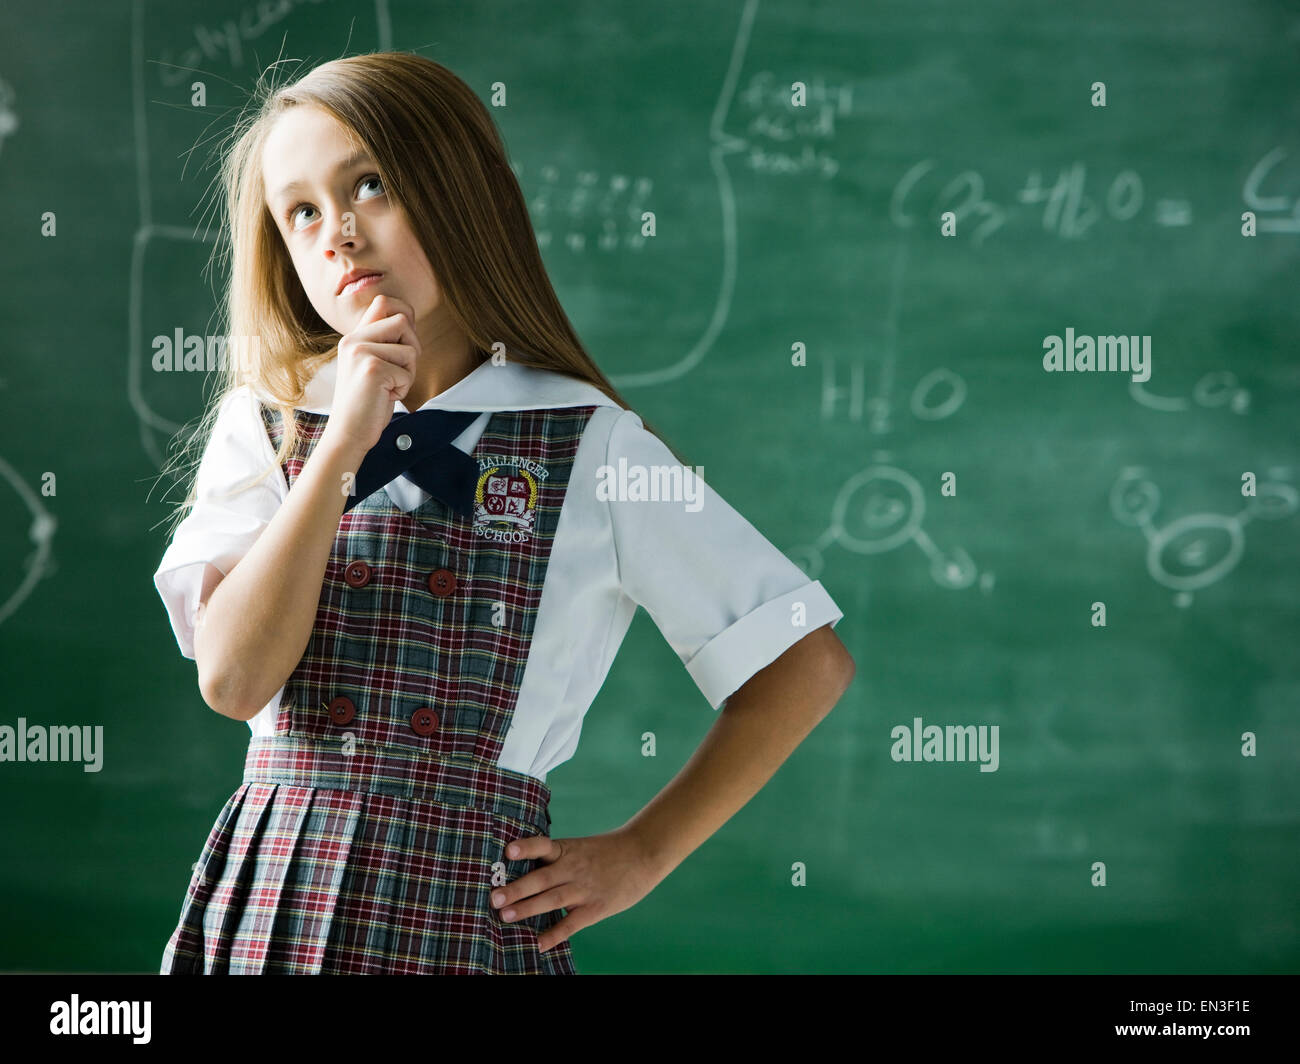 girl in a classroom standing in front of the chalkboard Stock Photo